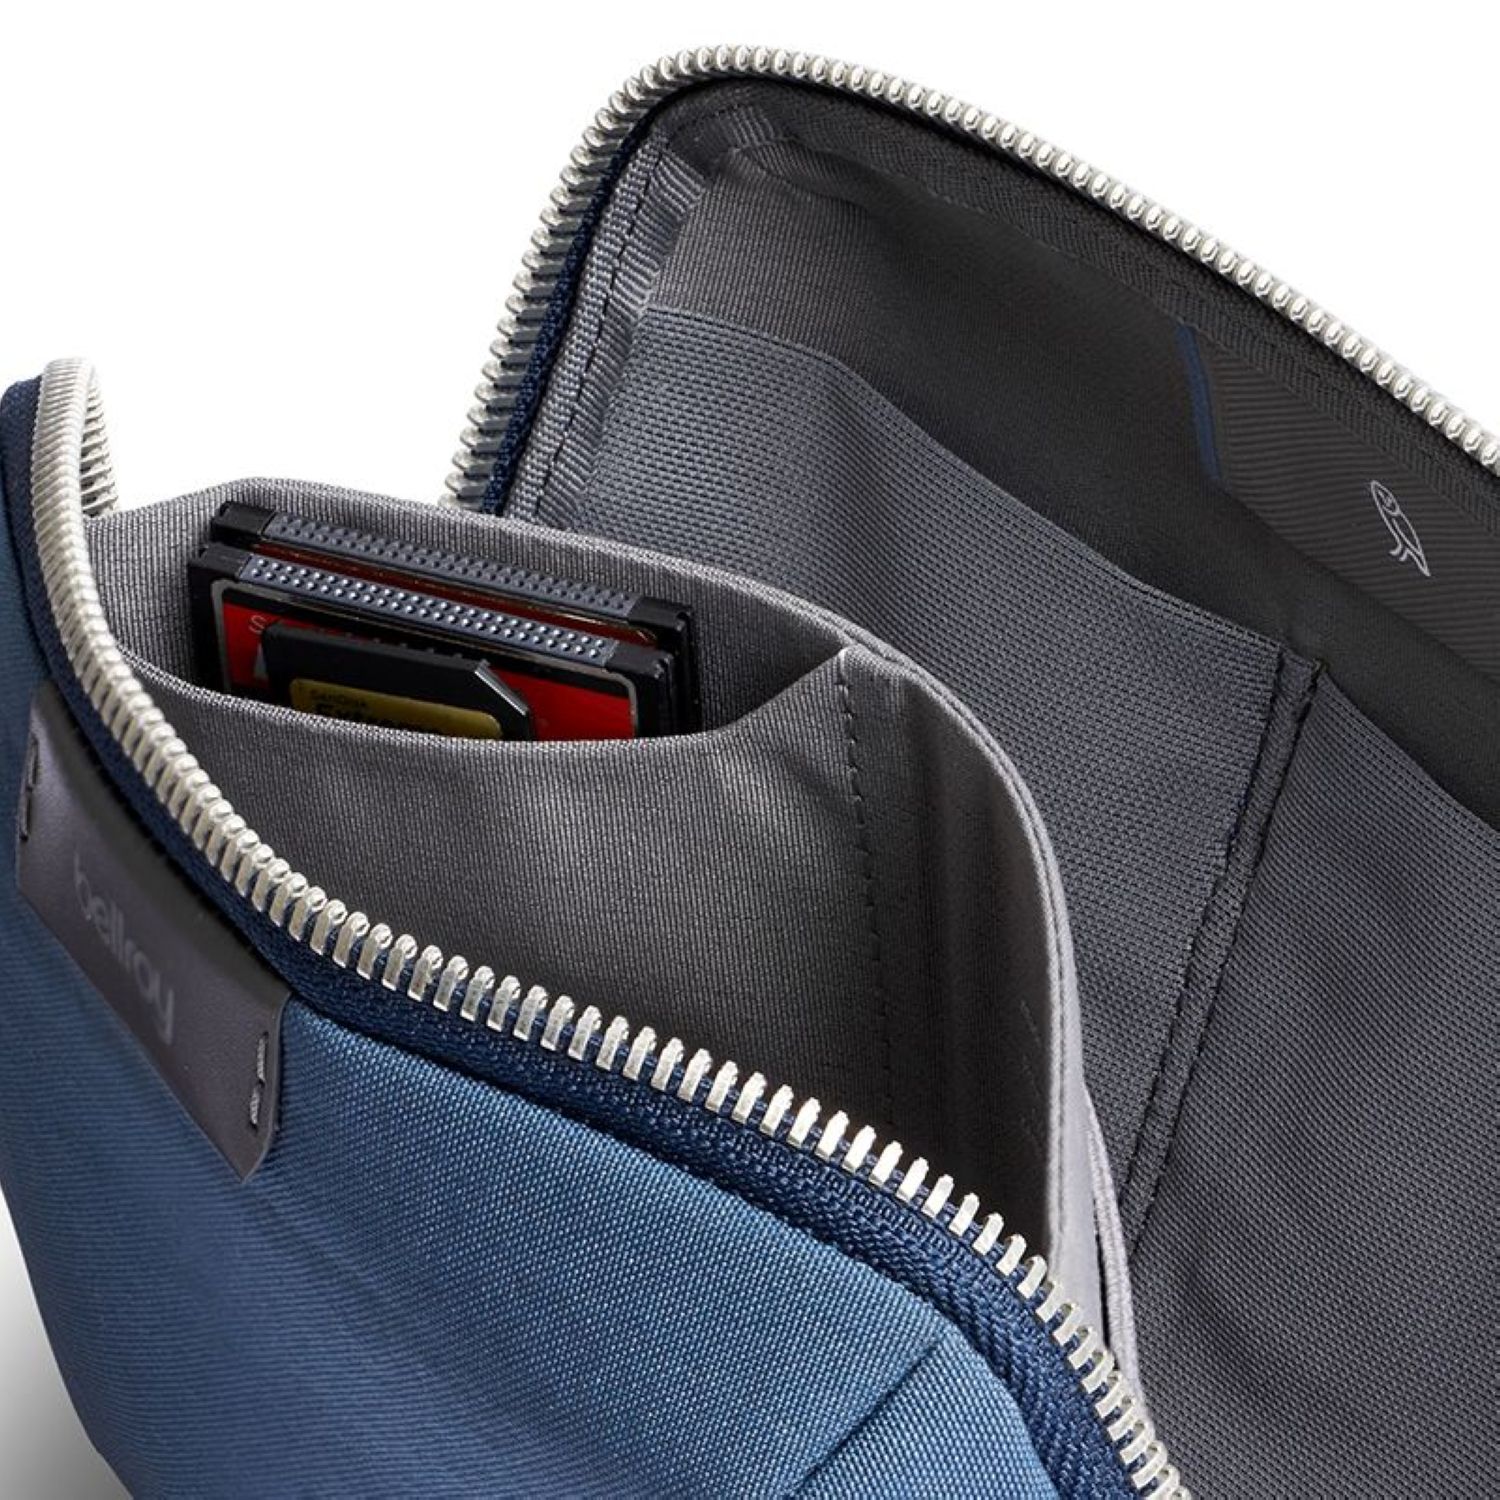 Buy Bellroy Tech Kit Compact - Marine Blue in Malaysia ...